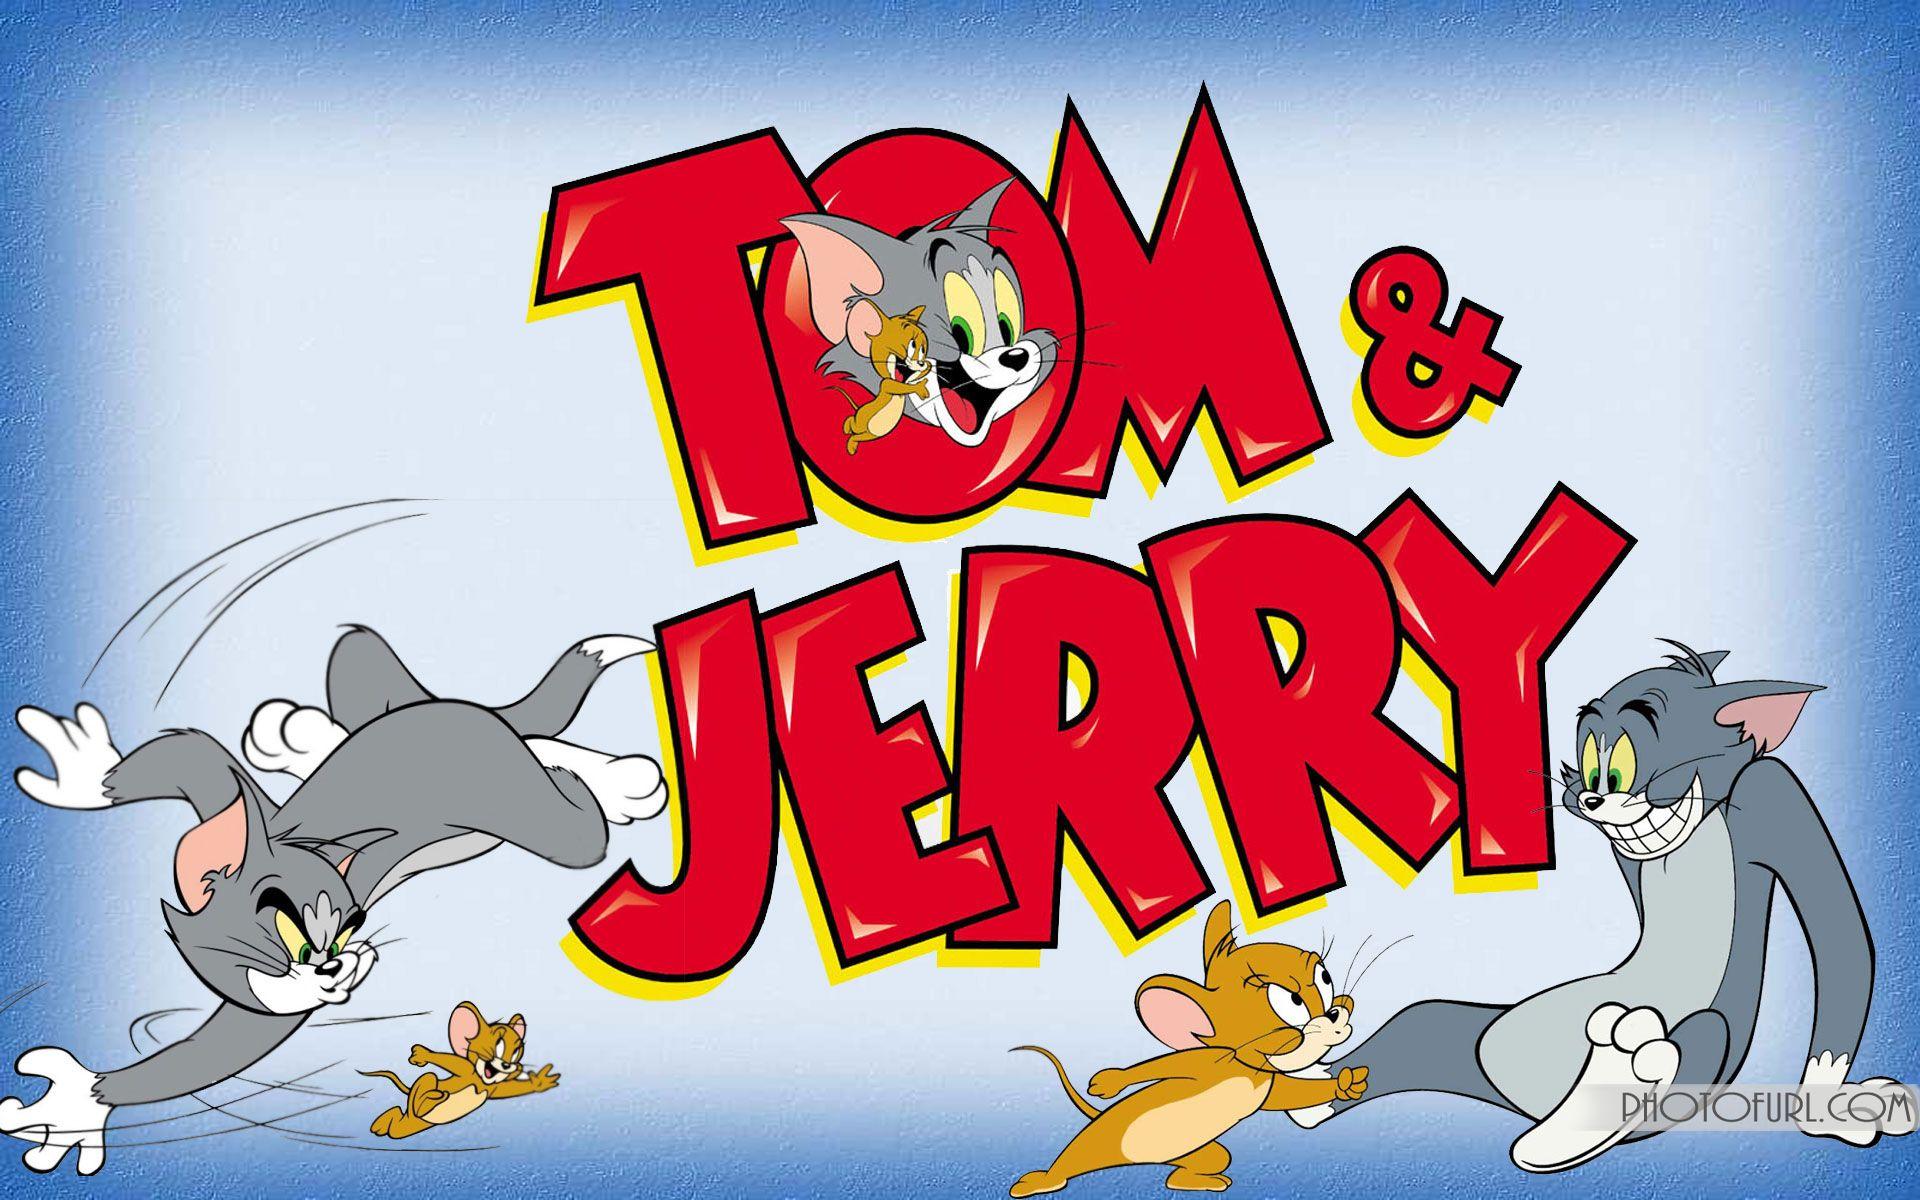 Tom and jerry 55. Tom and Jerry 2021. Шоу Тома и Джерри 2021. Том и Джерри 1950. Том и Джерри 1997.